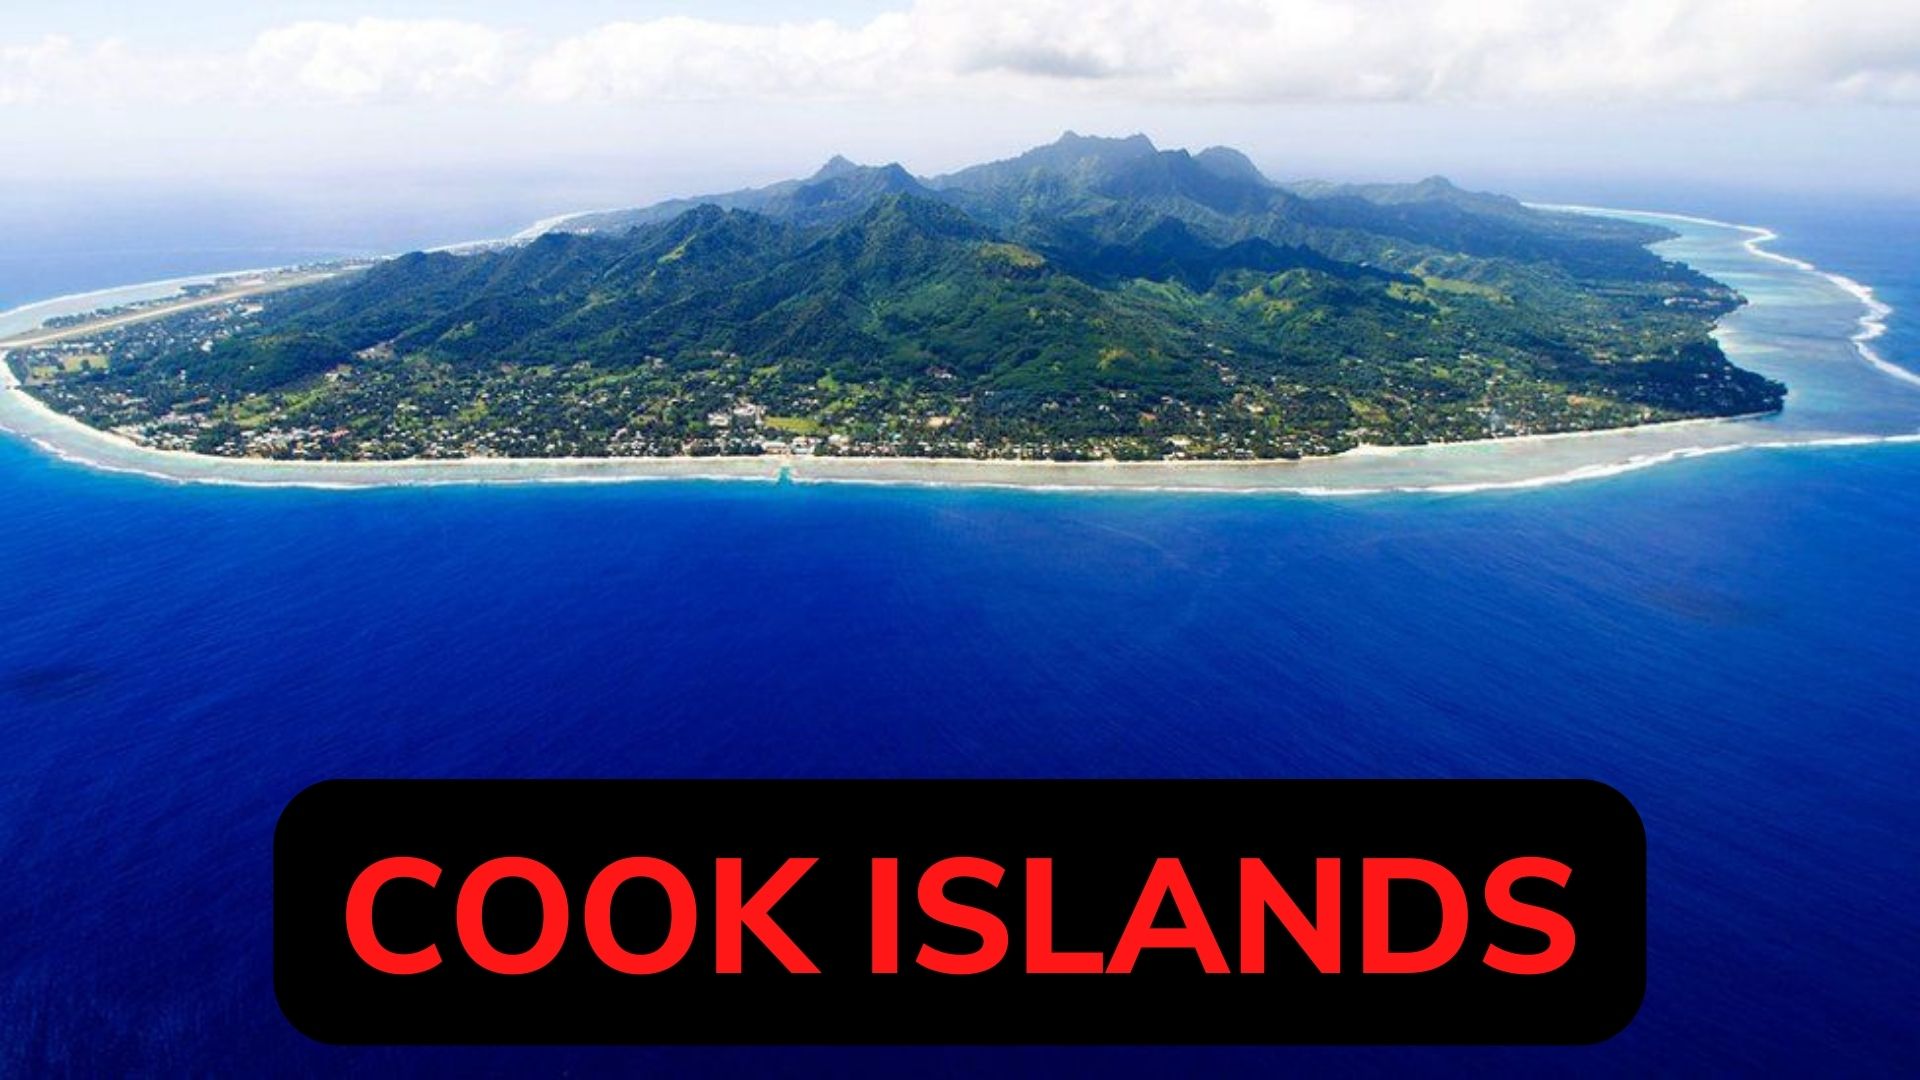 Cook Islands - A South Pacific Paradise